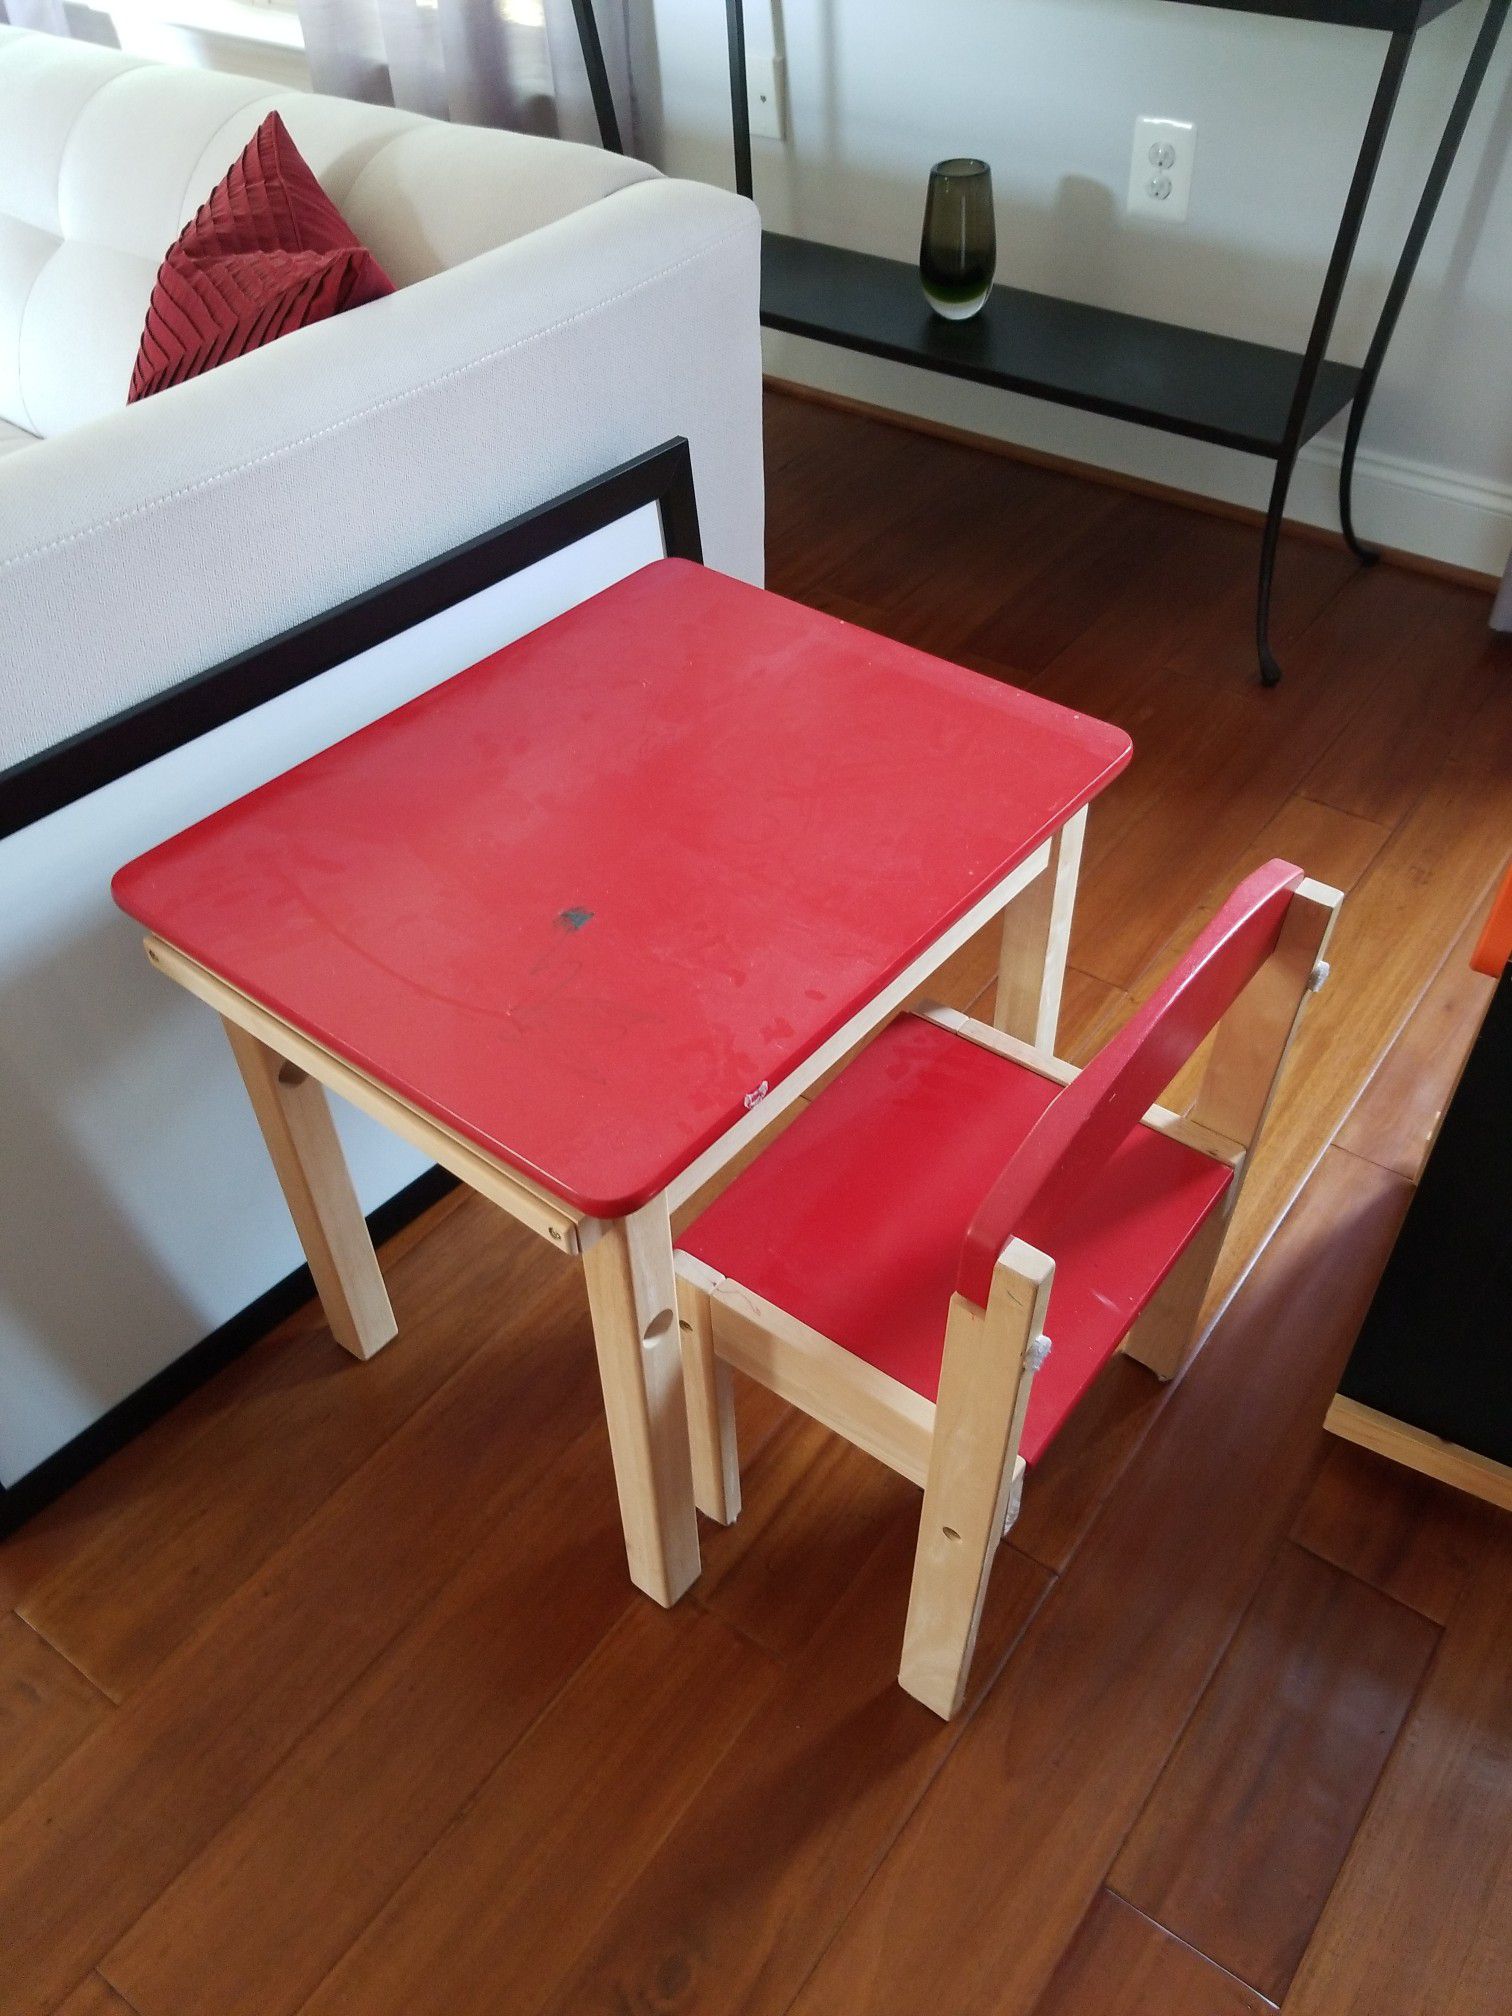 Child's table & chair, easel.